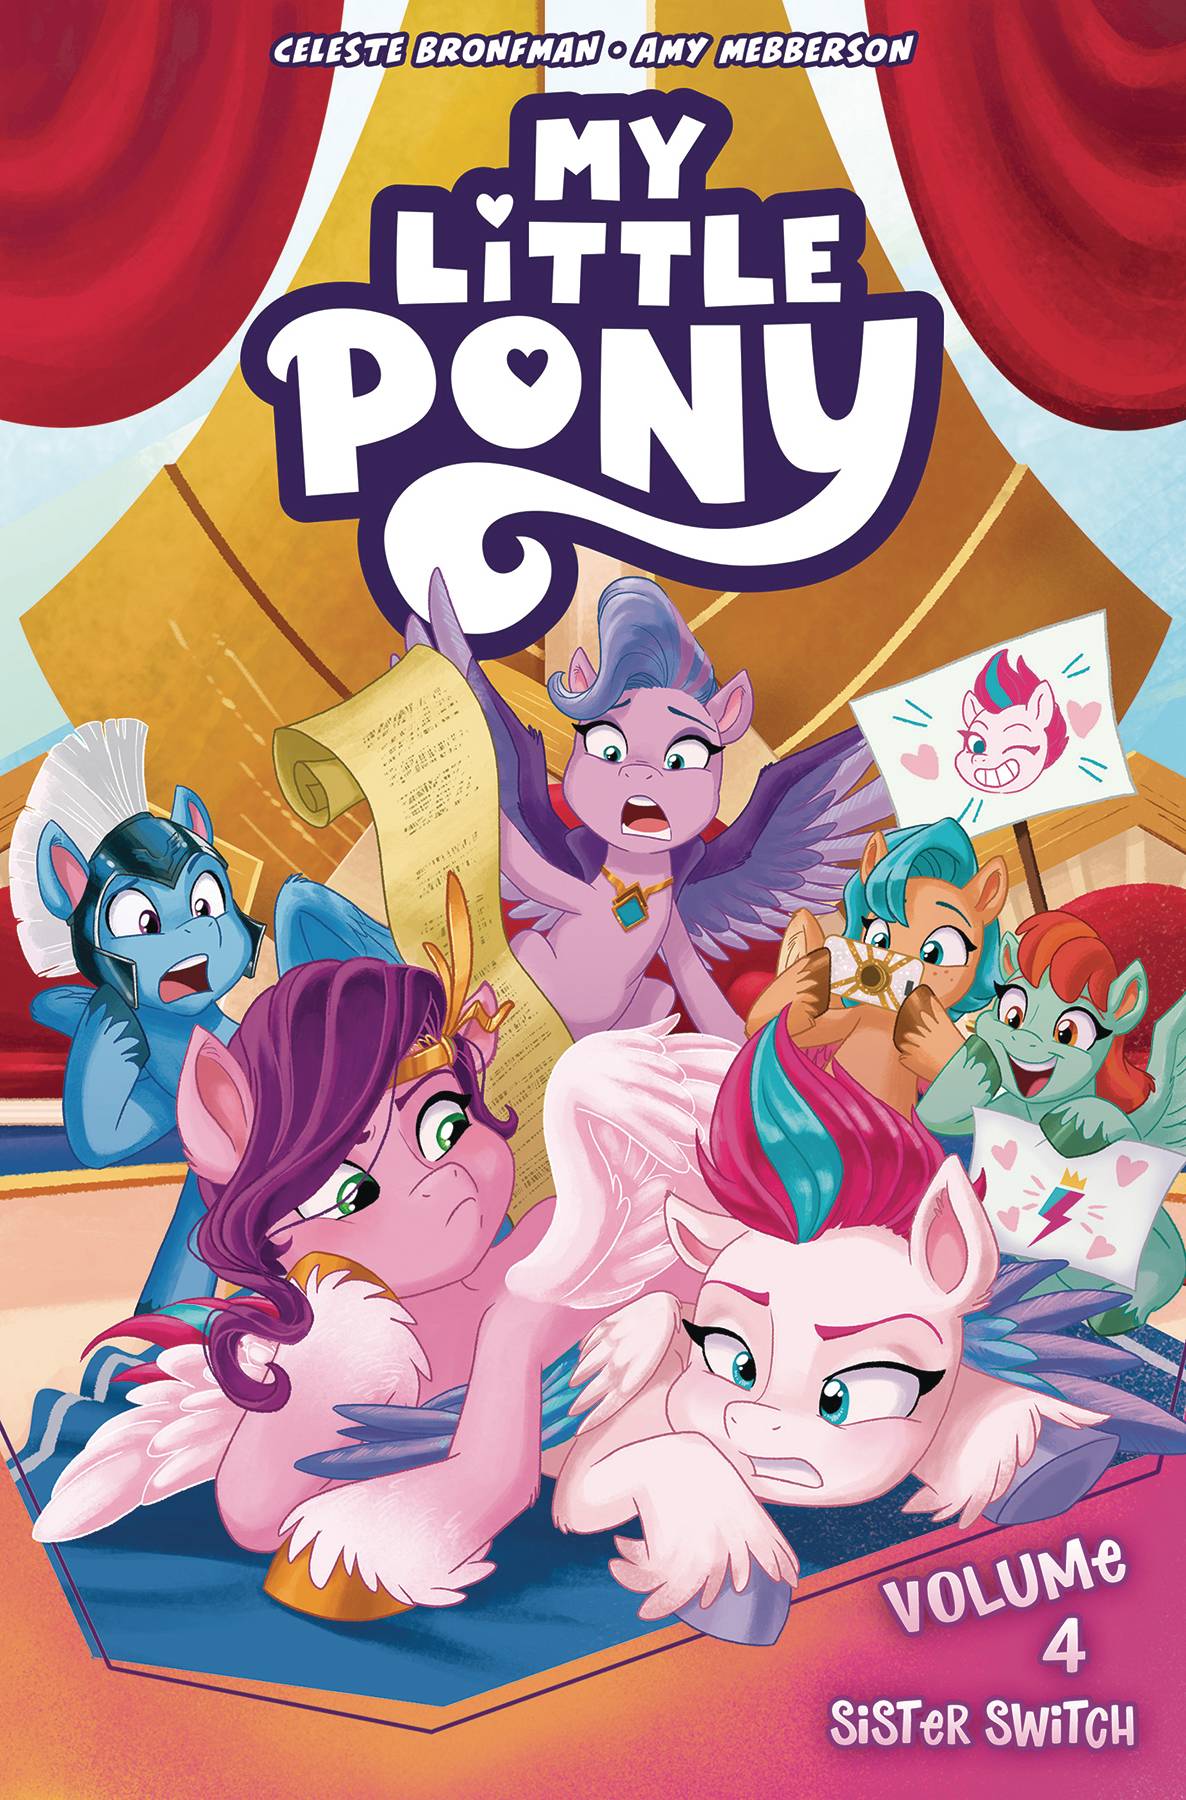 MY LITTLE PONY VOL 04 SISTER SWITCH